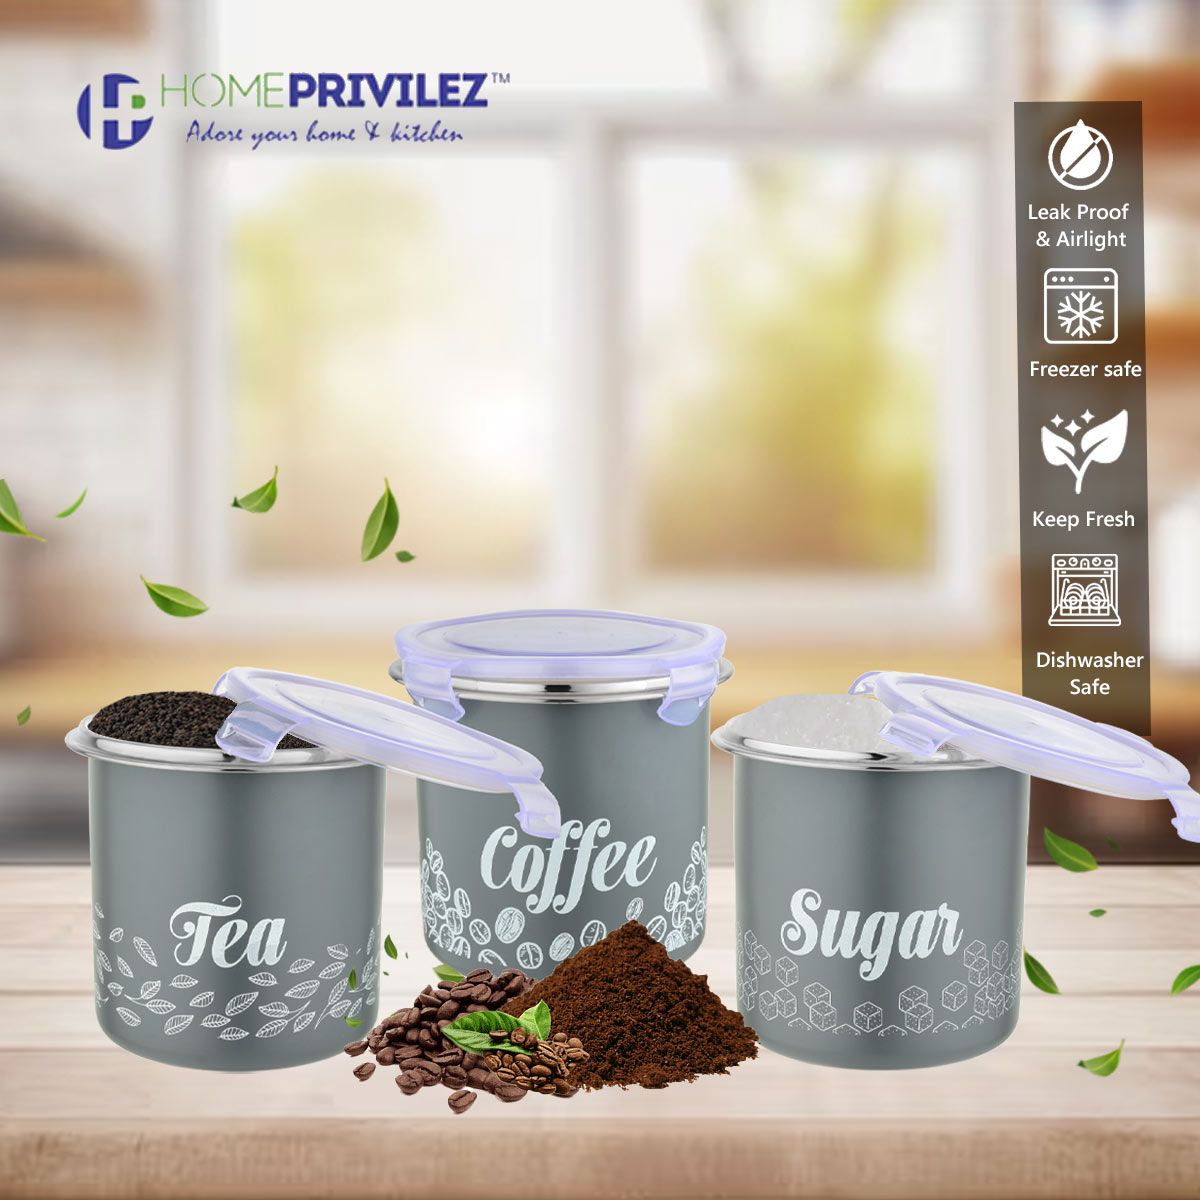 “Flip & Seal “Stainless Steel Air Tight Storage Container- Tea, Coffee & Sugar Set of 3 in Grey colour(1000mLx3)